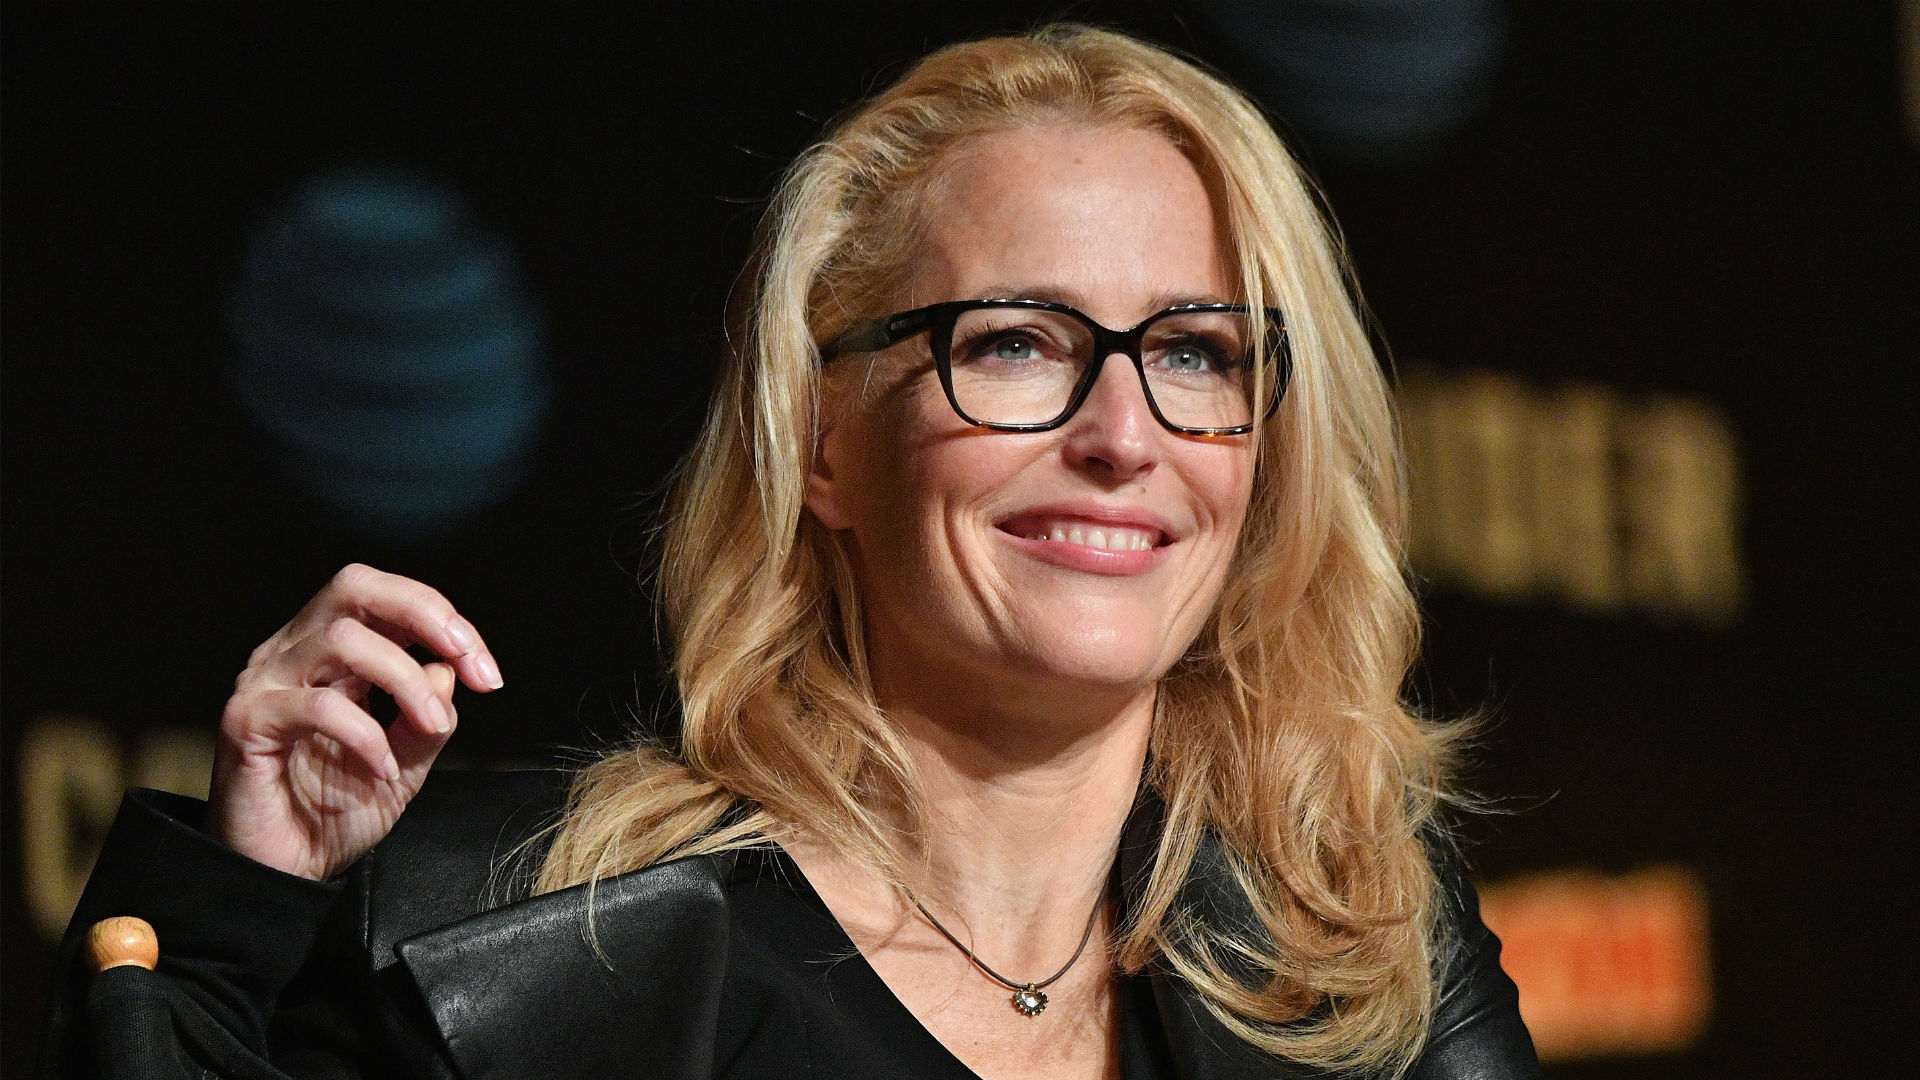 Gillian Anderson Explains Why She Left Hollywood Following 'The X-Files' Success